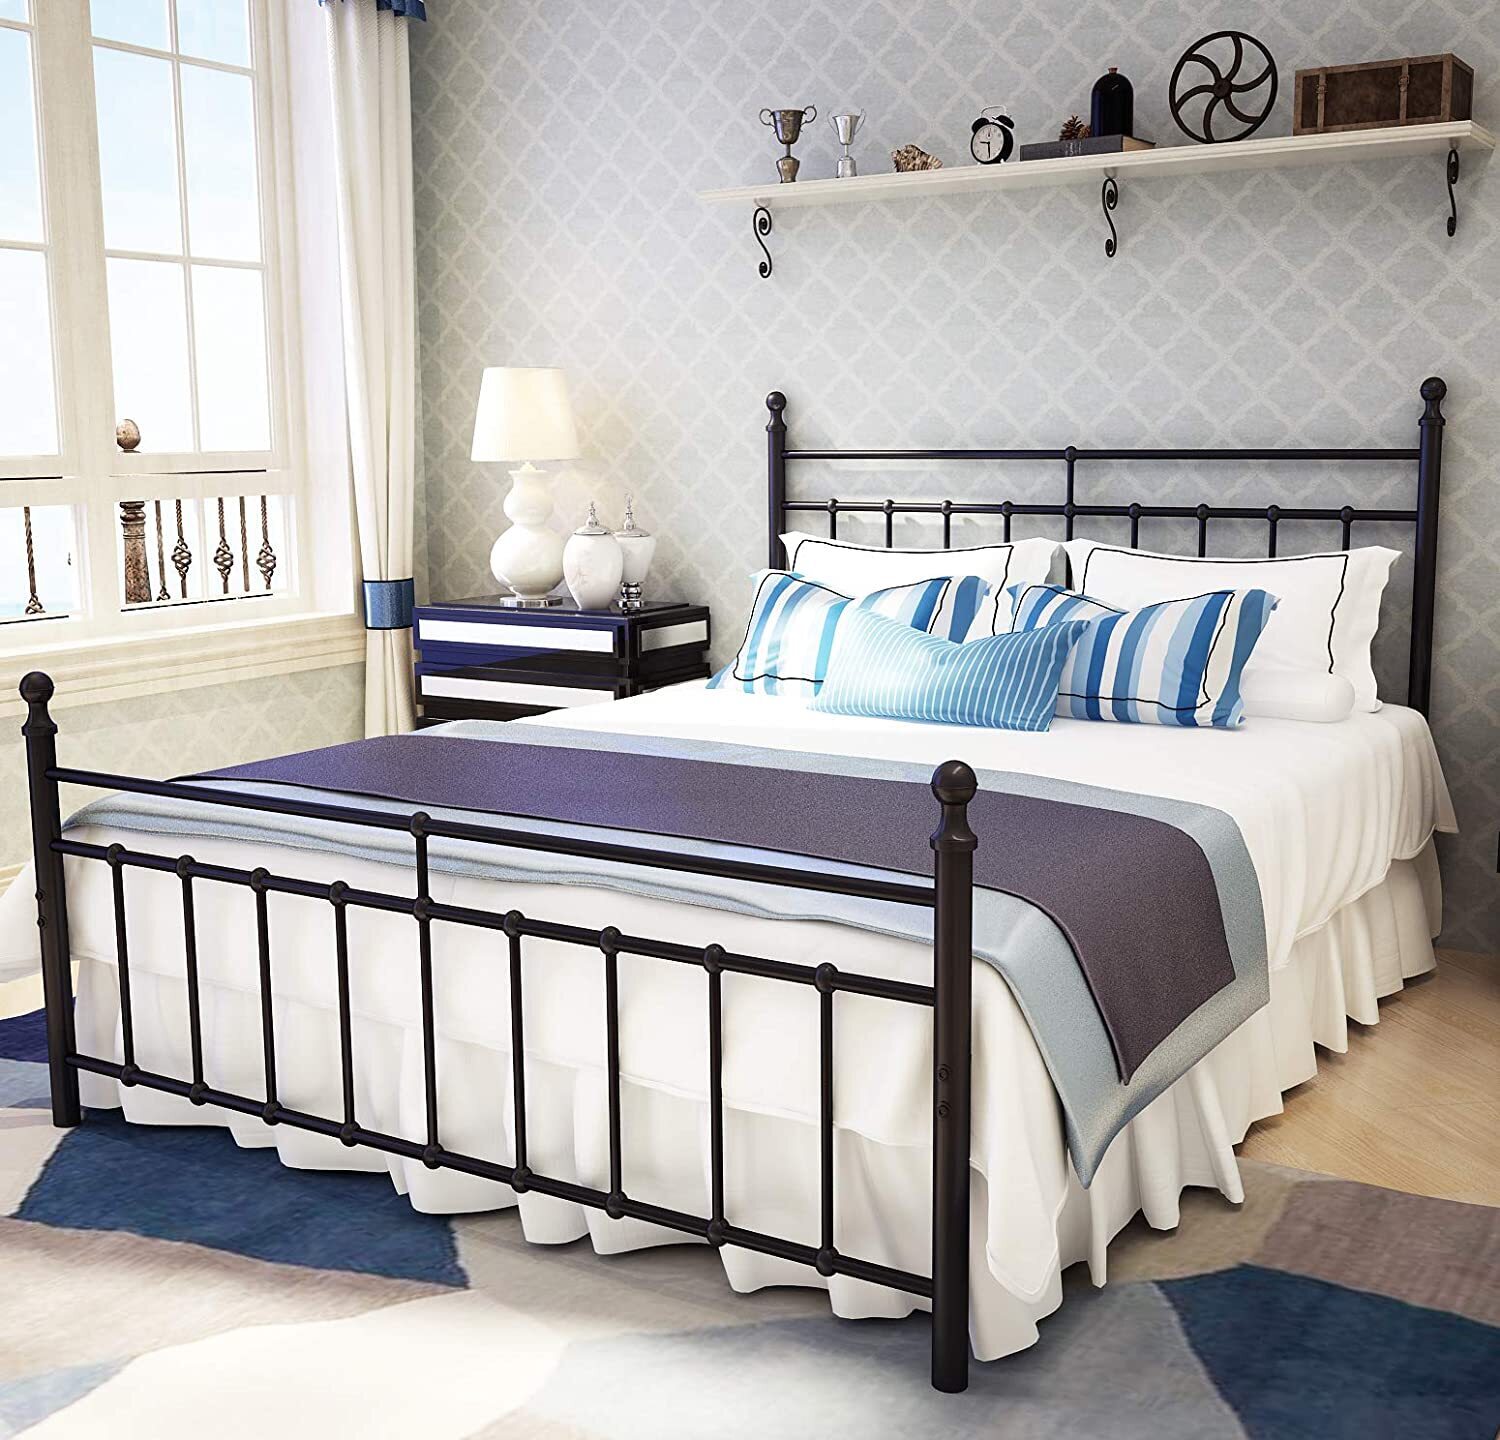 Wrought Iron Bed With Bed Posts